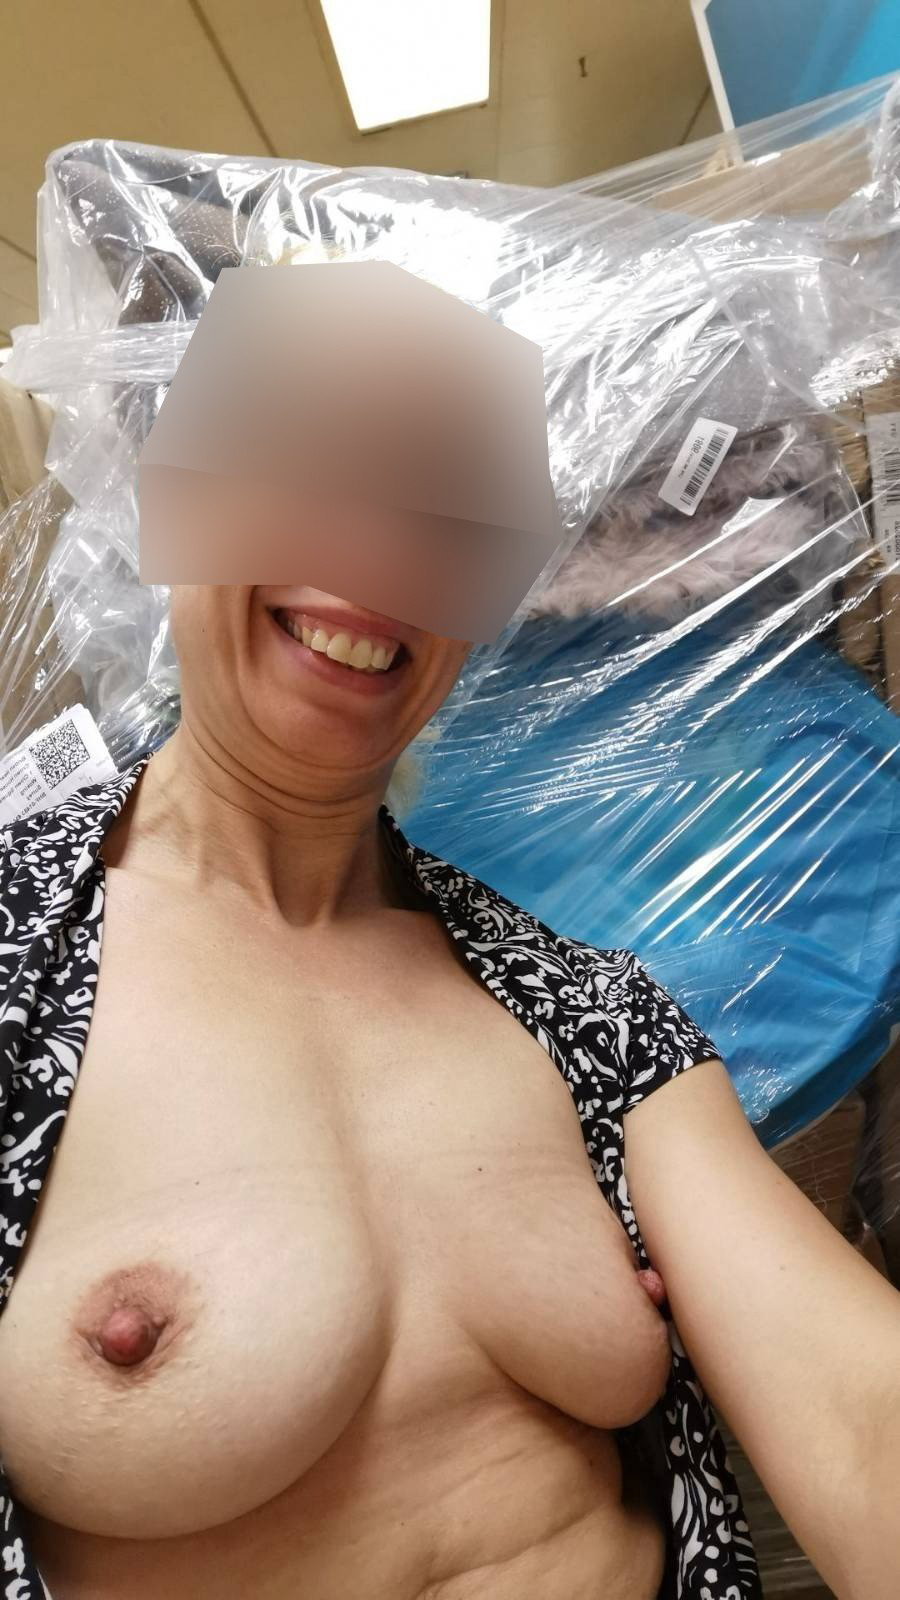 Photo by Joker_and_Harley with the username @Joker-and-Harley, who is a verified user,  December 12, 2022 at 2:48 PM. The post is about the topic Naked Women At Work and the text says 'Share,Like,Flame and comment... Cock/Cumtribute very welcome ... plenty of choice on our gallery....and tag to let us know of course!!'